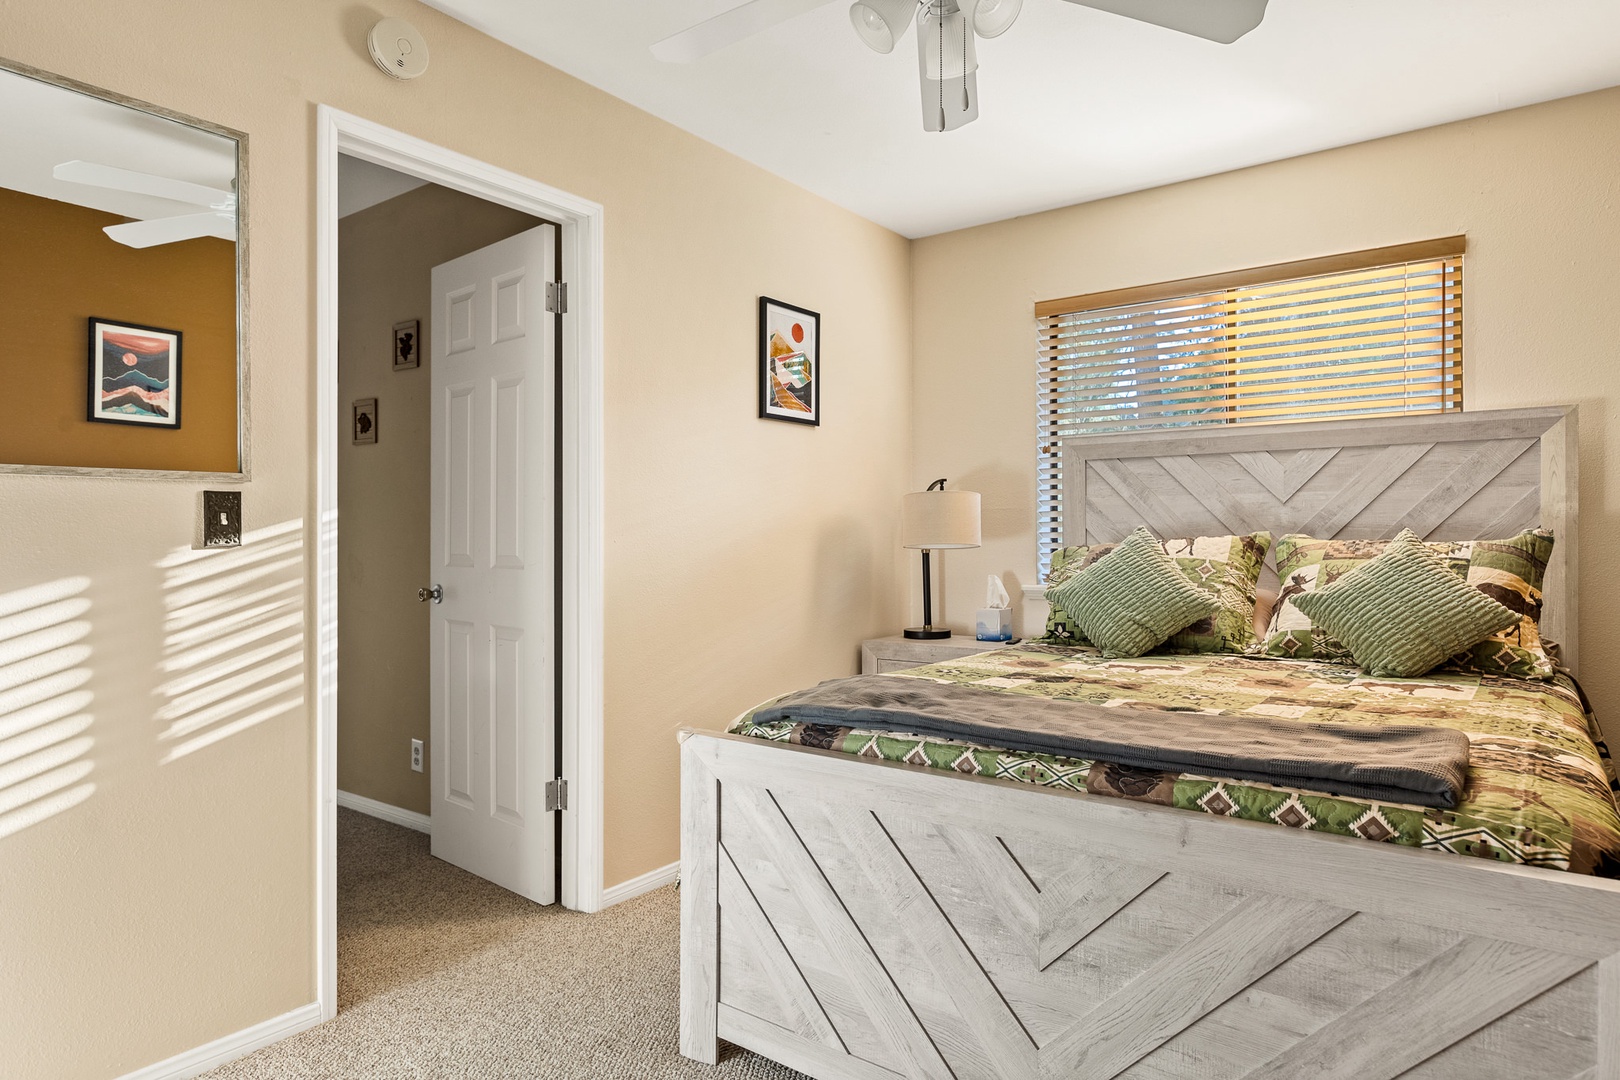 The 2nd of two bedrooms includes a queen bed, ceiling fan, & walk-in closet